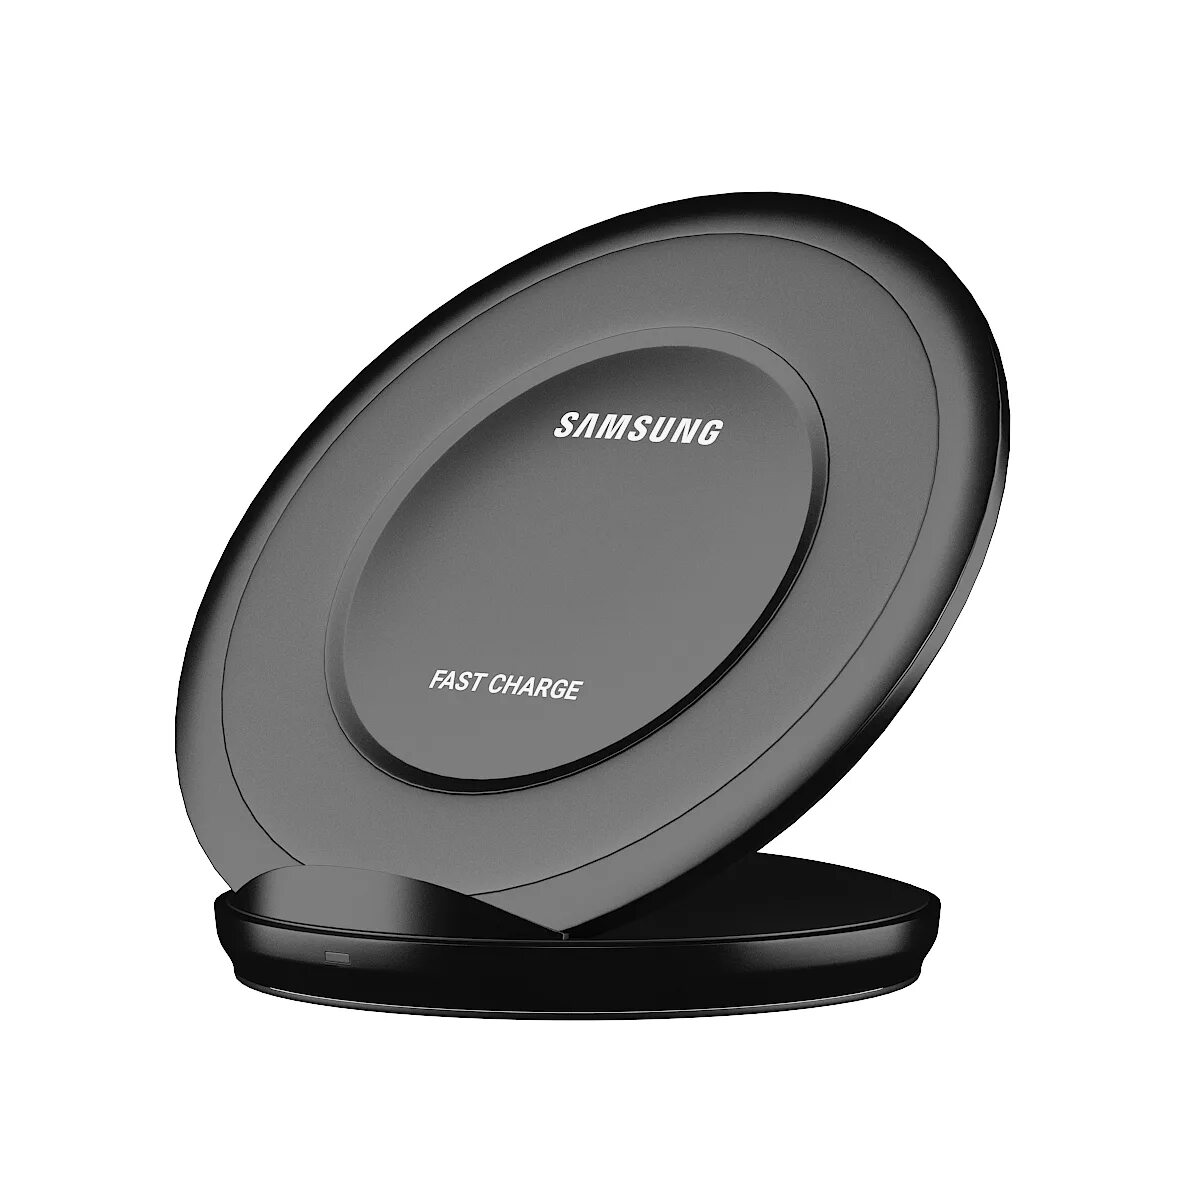 Samsung fast charge. Samsung fast charge 1000. Samsung Wireless Charger. Самсунг fast charge. Фаст чардж